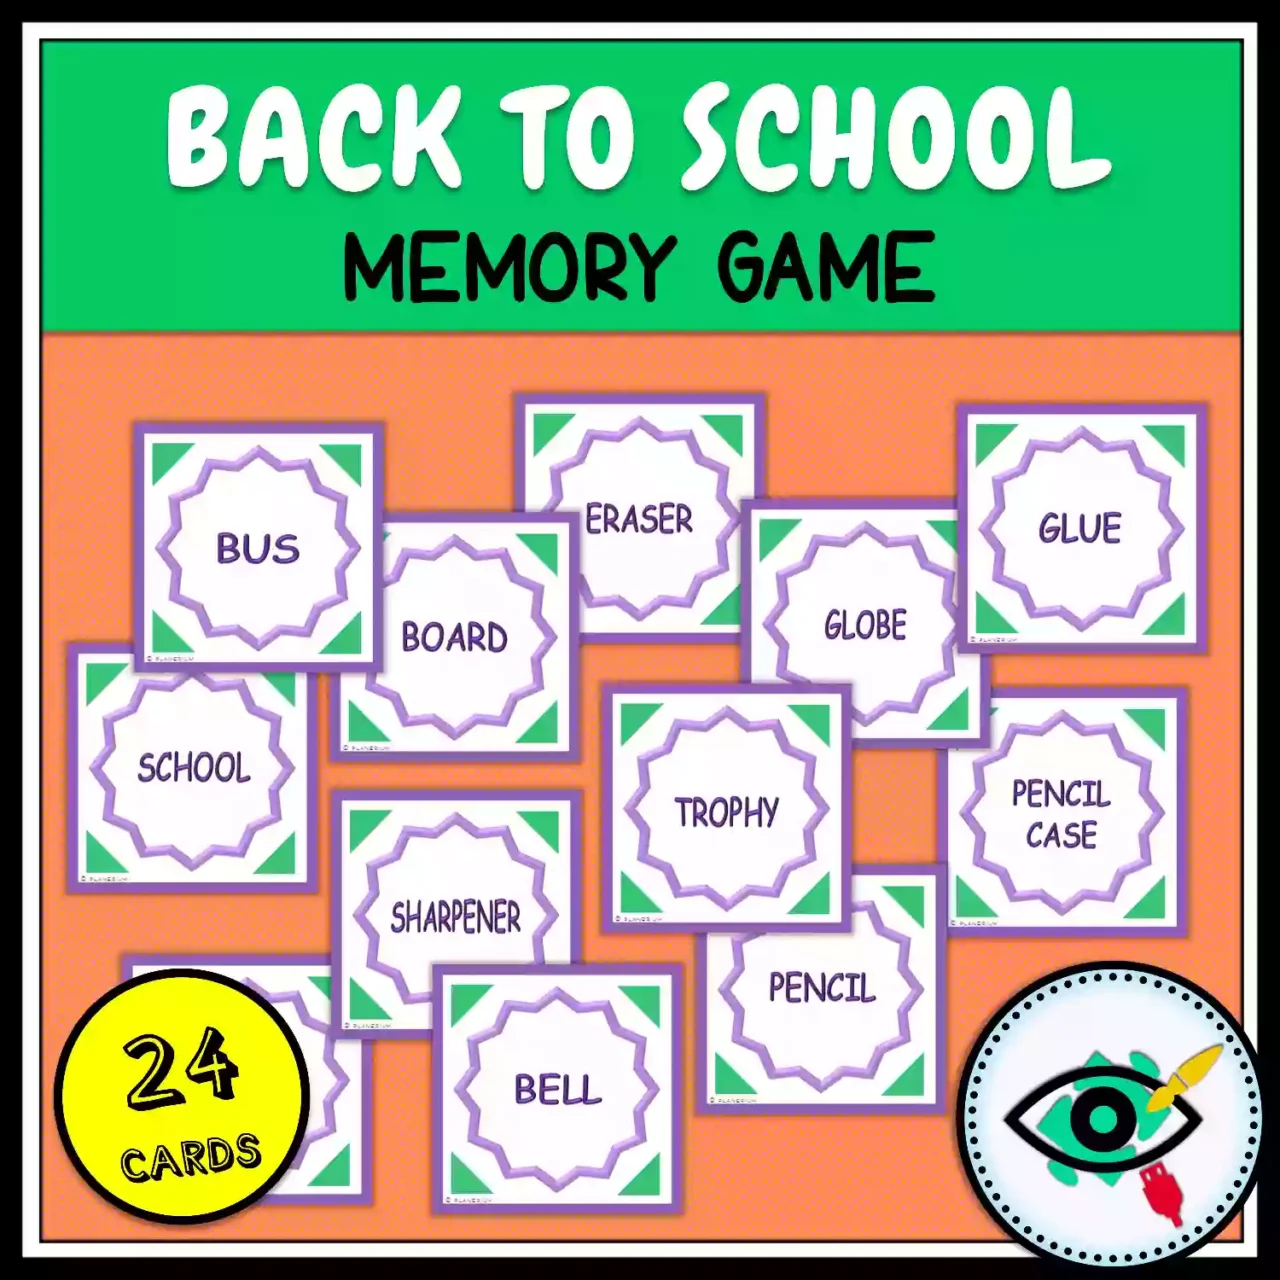 Back to School Memory Game - Featured 6